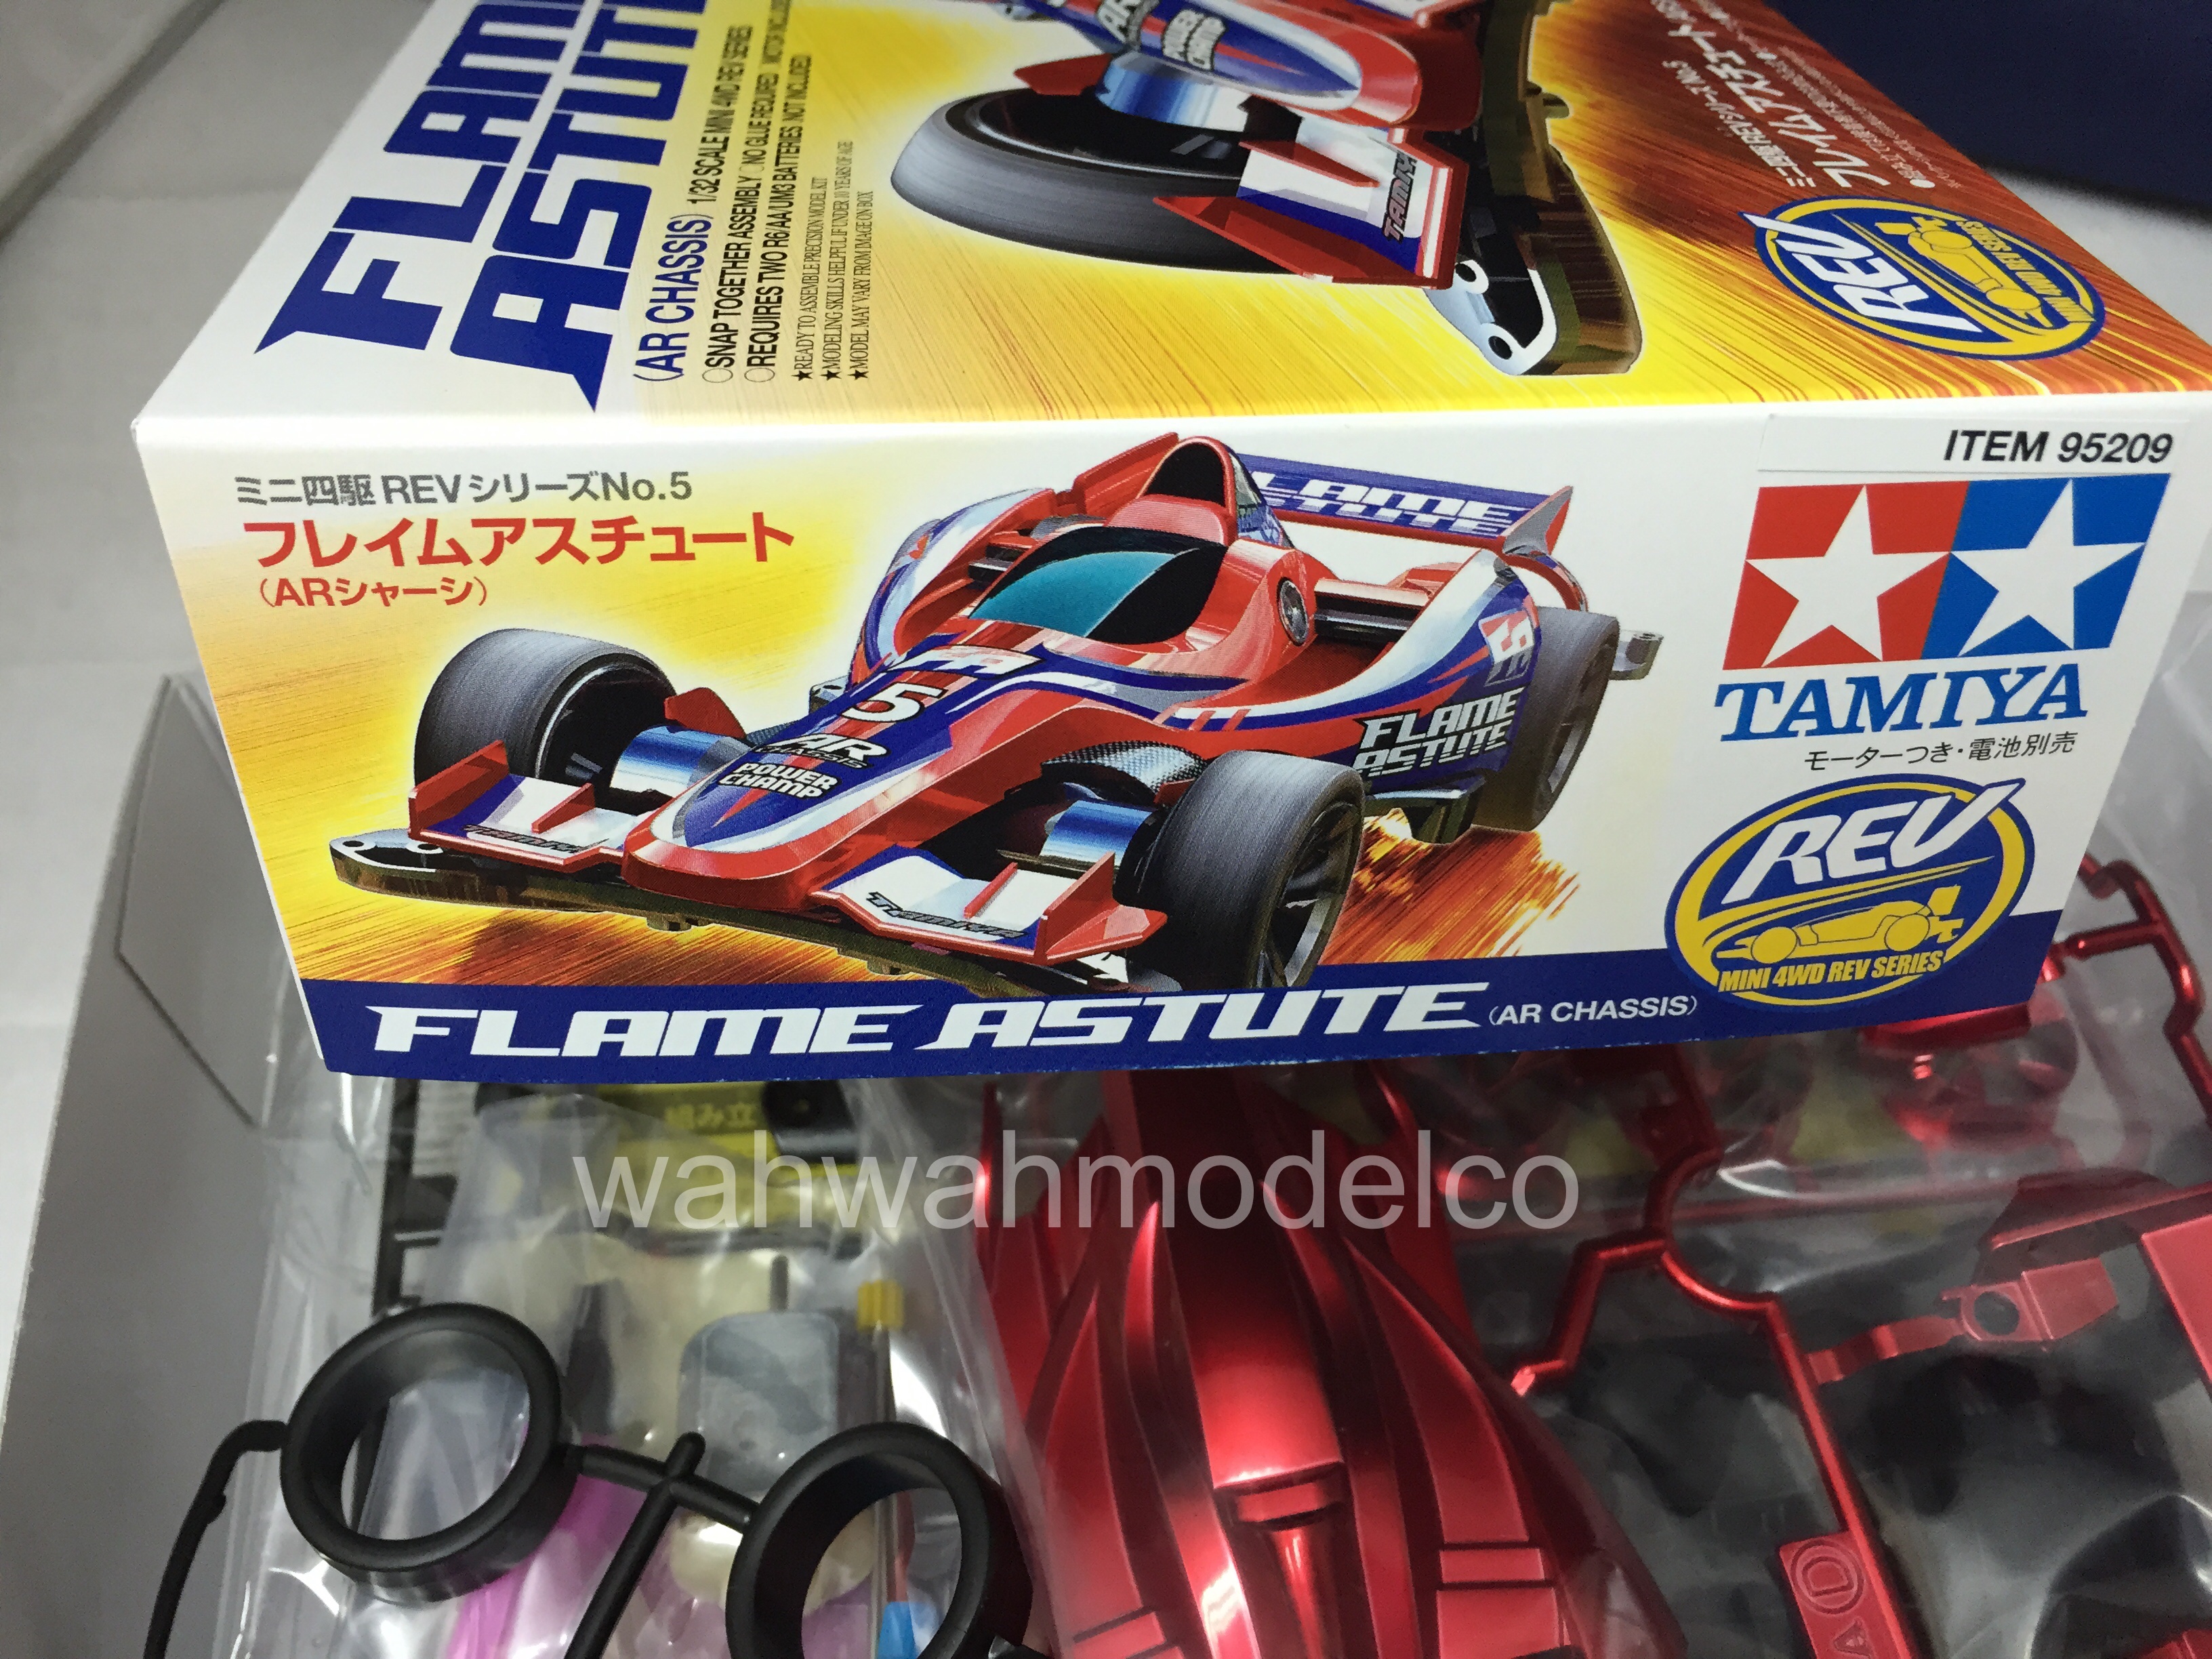 Details about   Tamiya 18705 Mini 4WD REV Series Flame Astute AR Chassis 1/32 